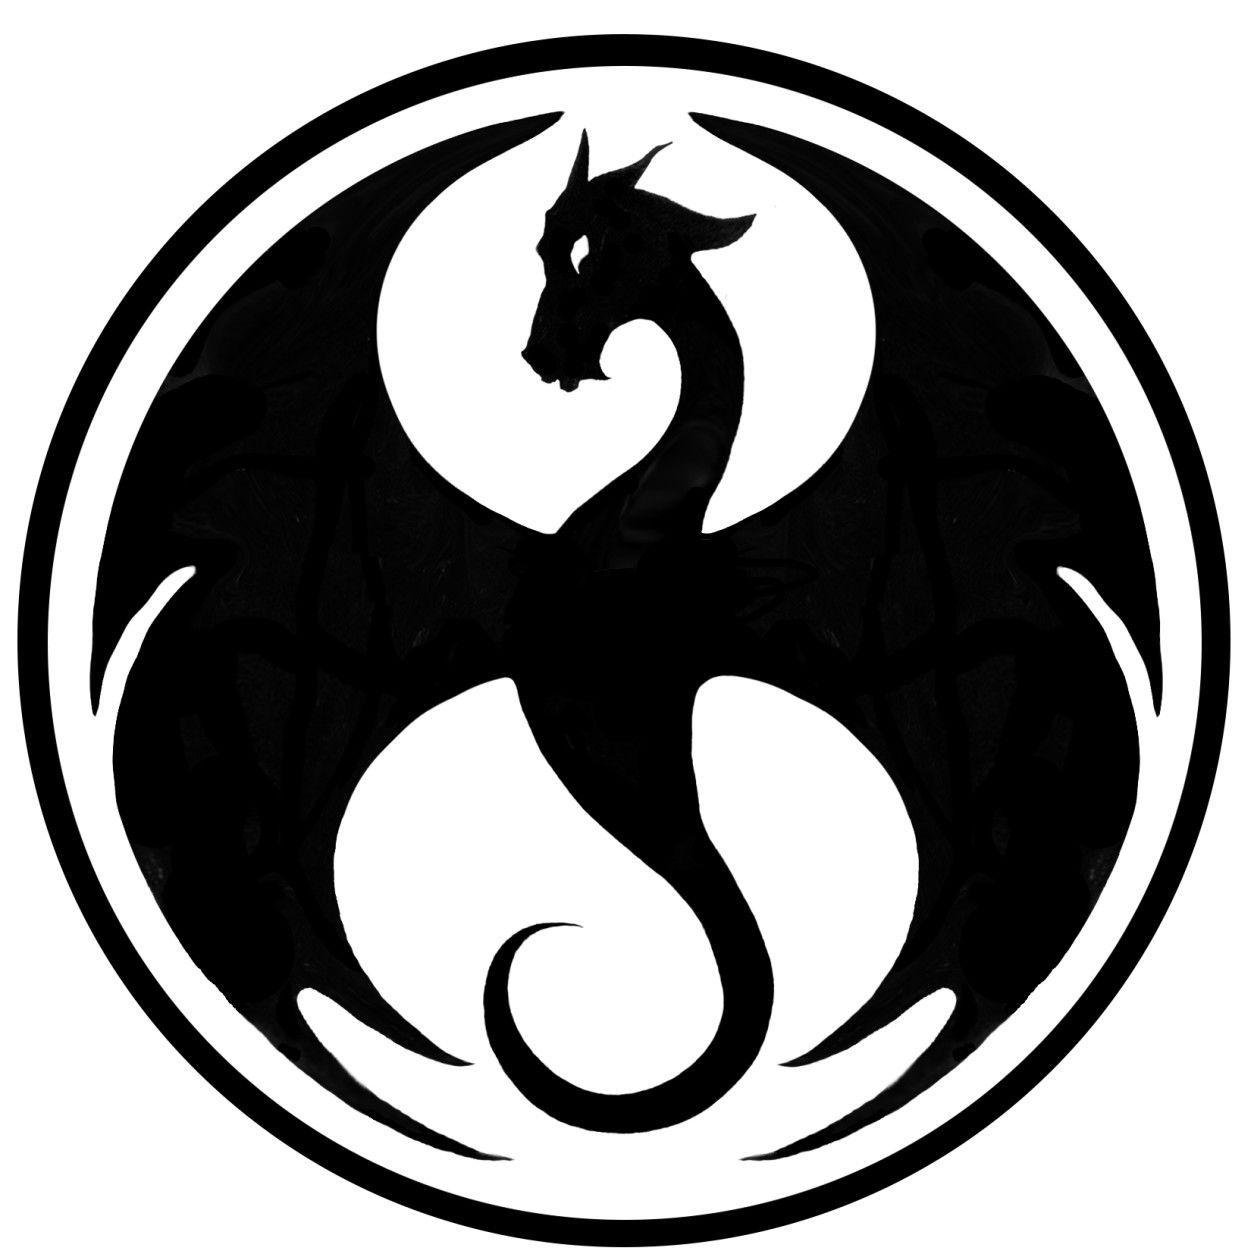 A Dragon in Circle Logo - Leather work. Leather carving, Leather